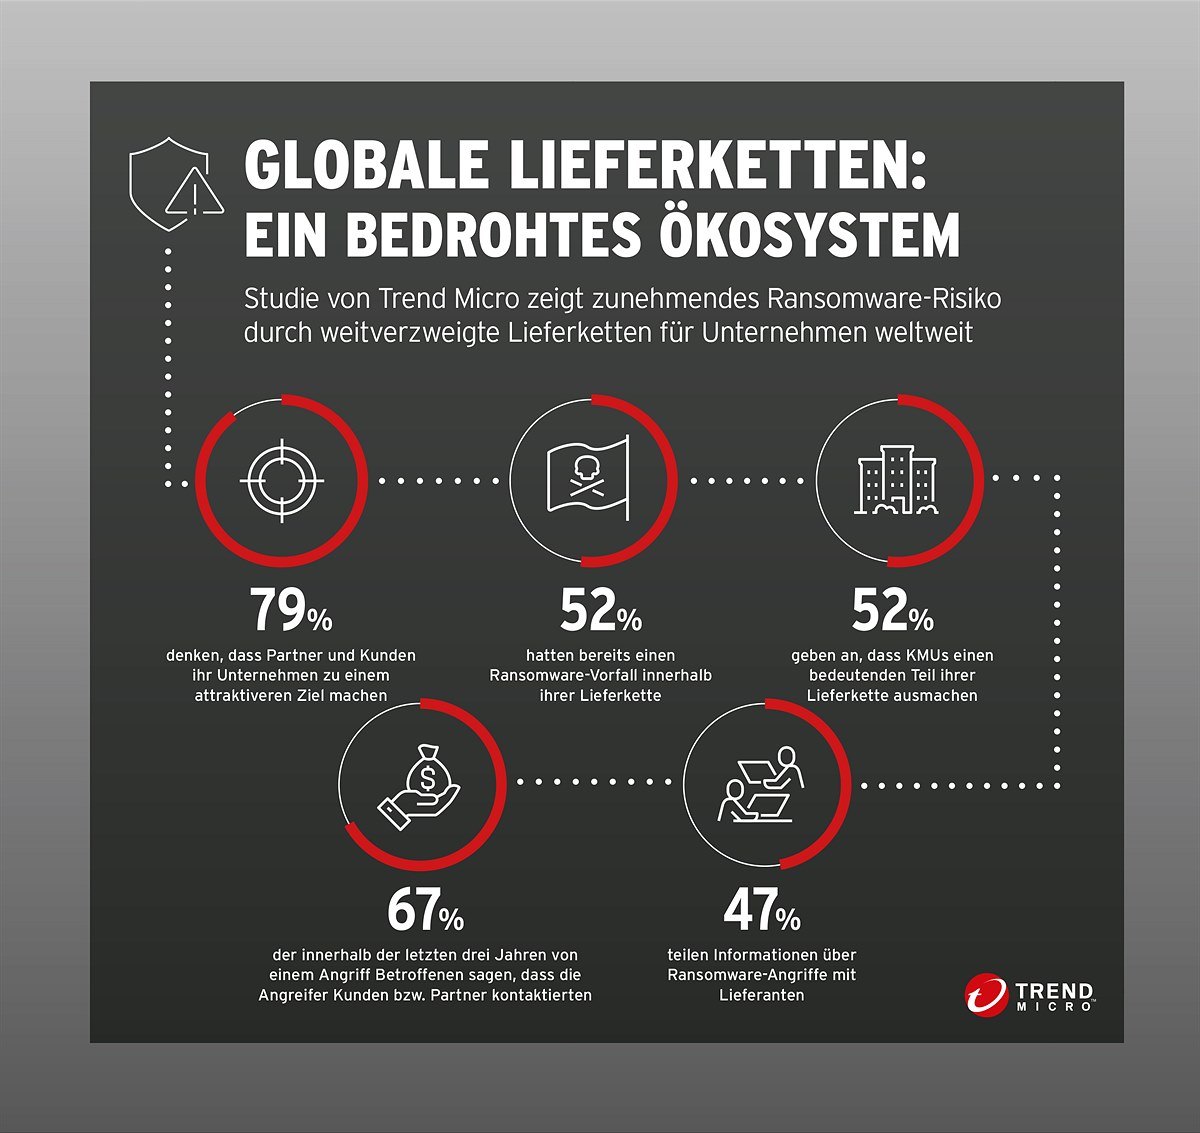 152_TREND_MICRO EVERYTHING IS CONNECTED INFOGRAPHIC_PLAIN_DE